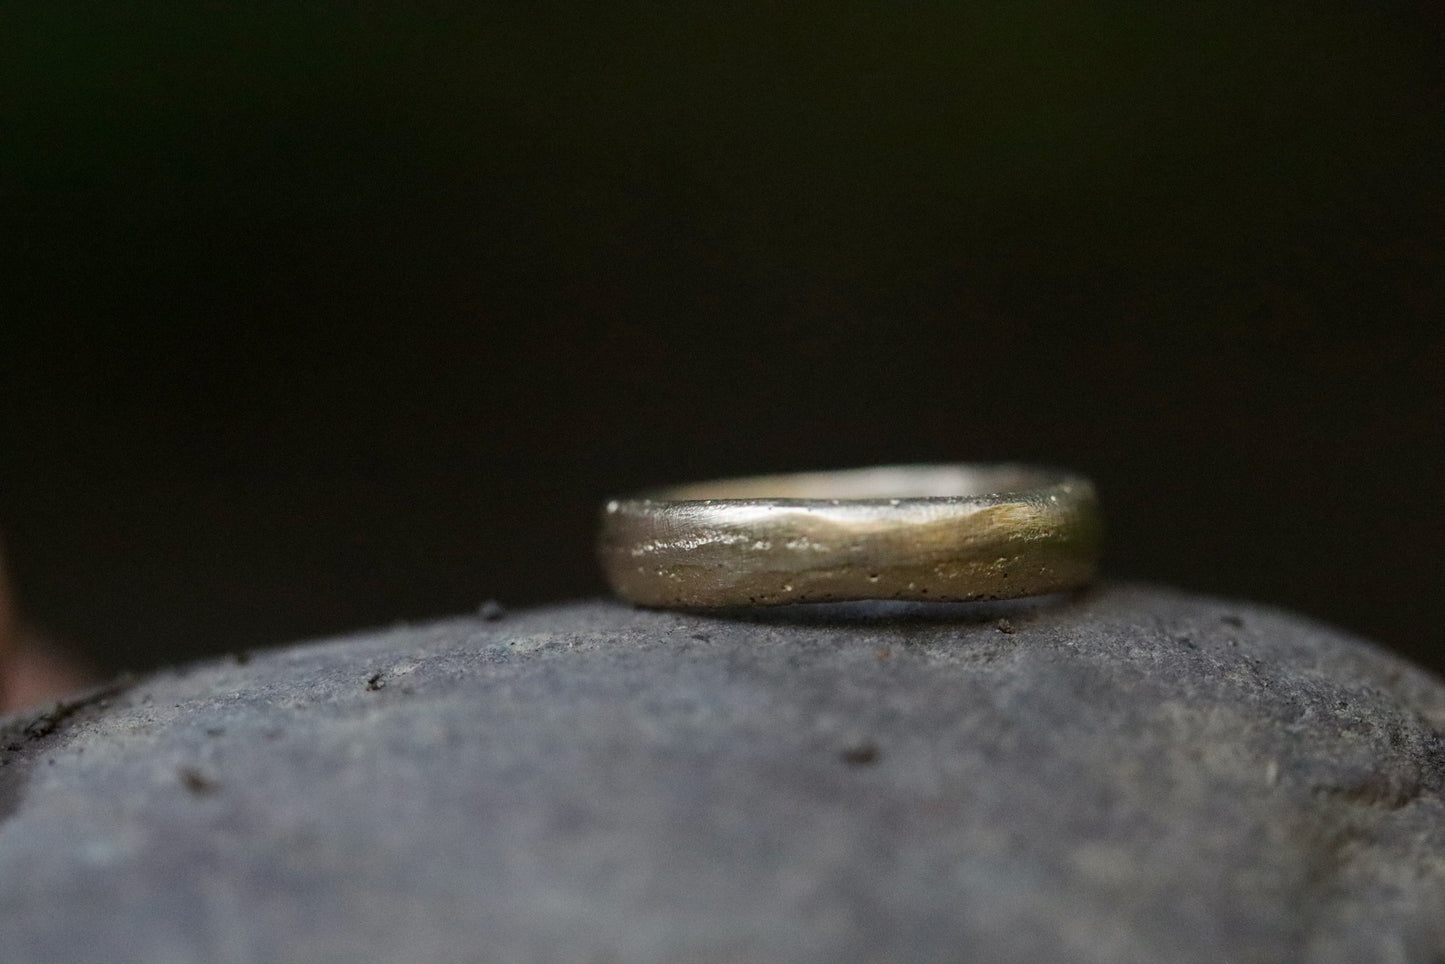 the arrowleaf rustic thin organic earthen sandcast ring band